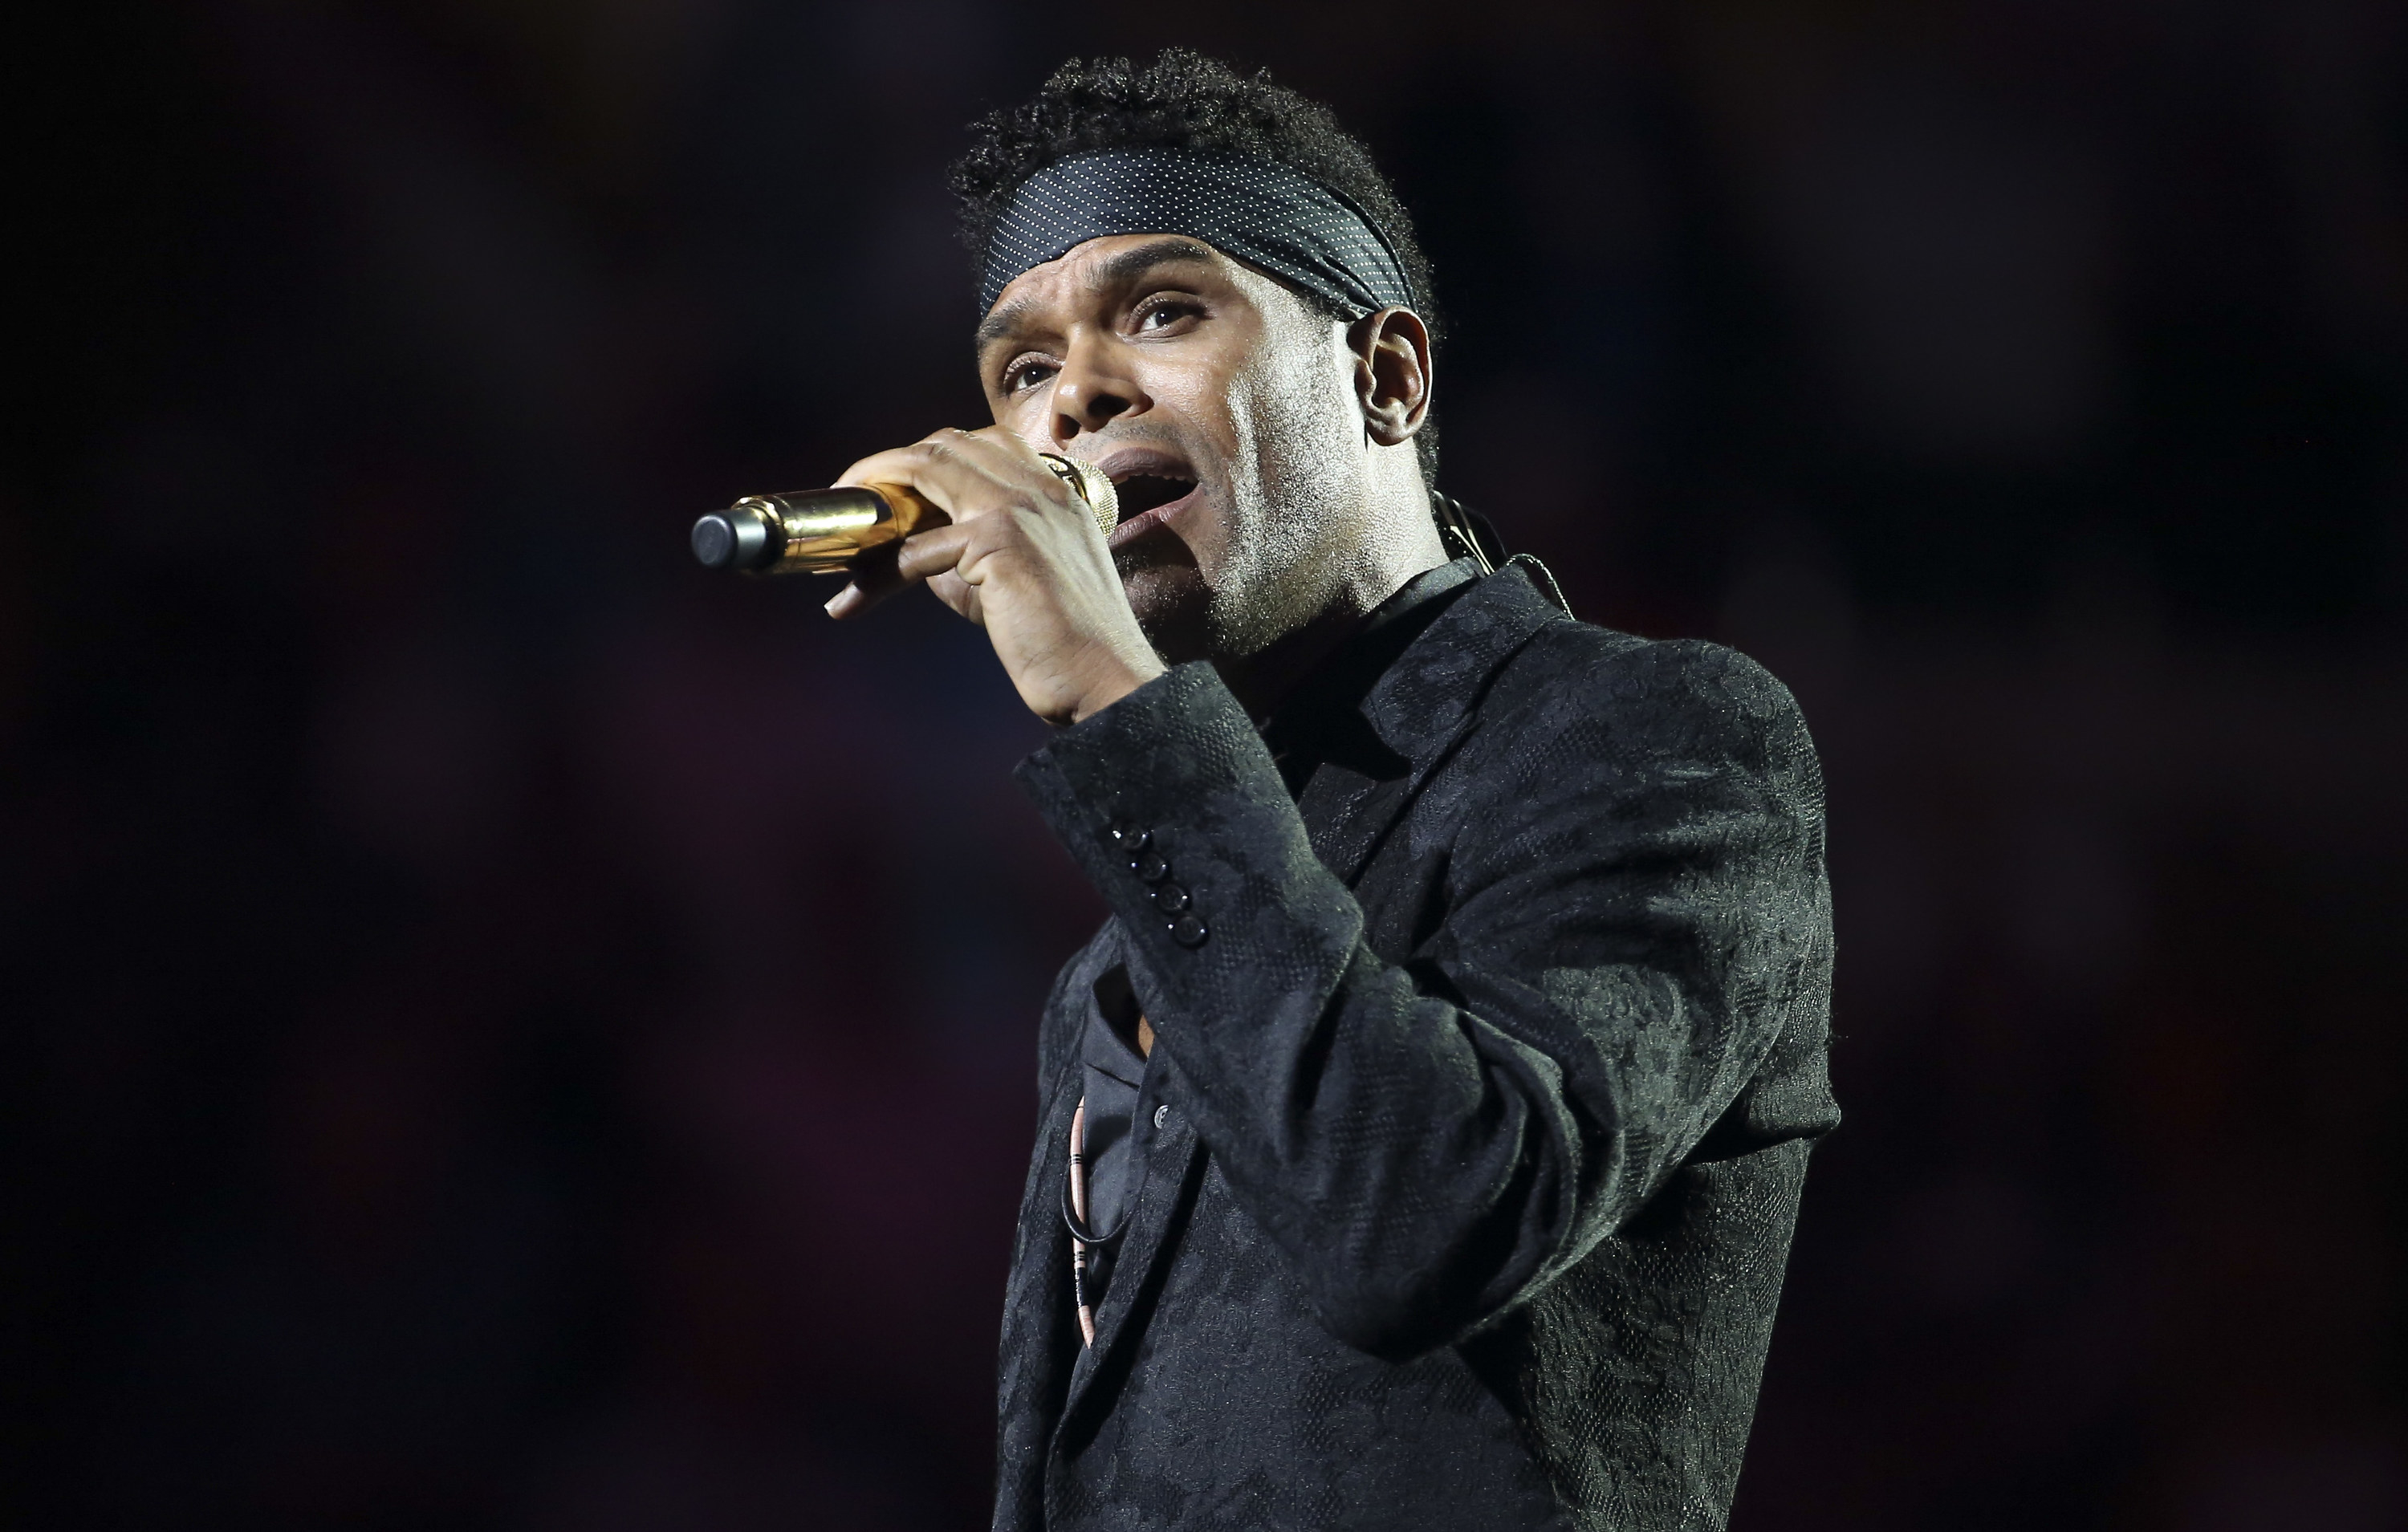 Maxwell performs the national anthem during the opening night gala of the 2018 tennis US Open held at Arthur Ashe stadium of USTA Billie Jean King National Tennis Center